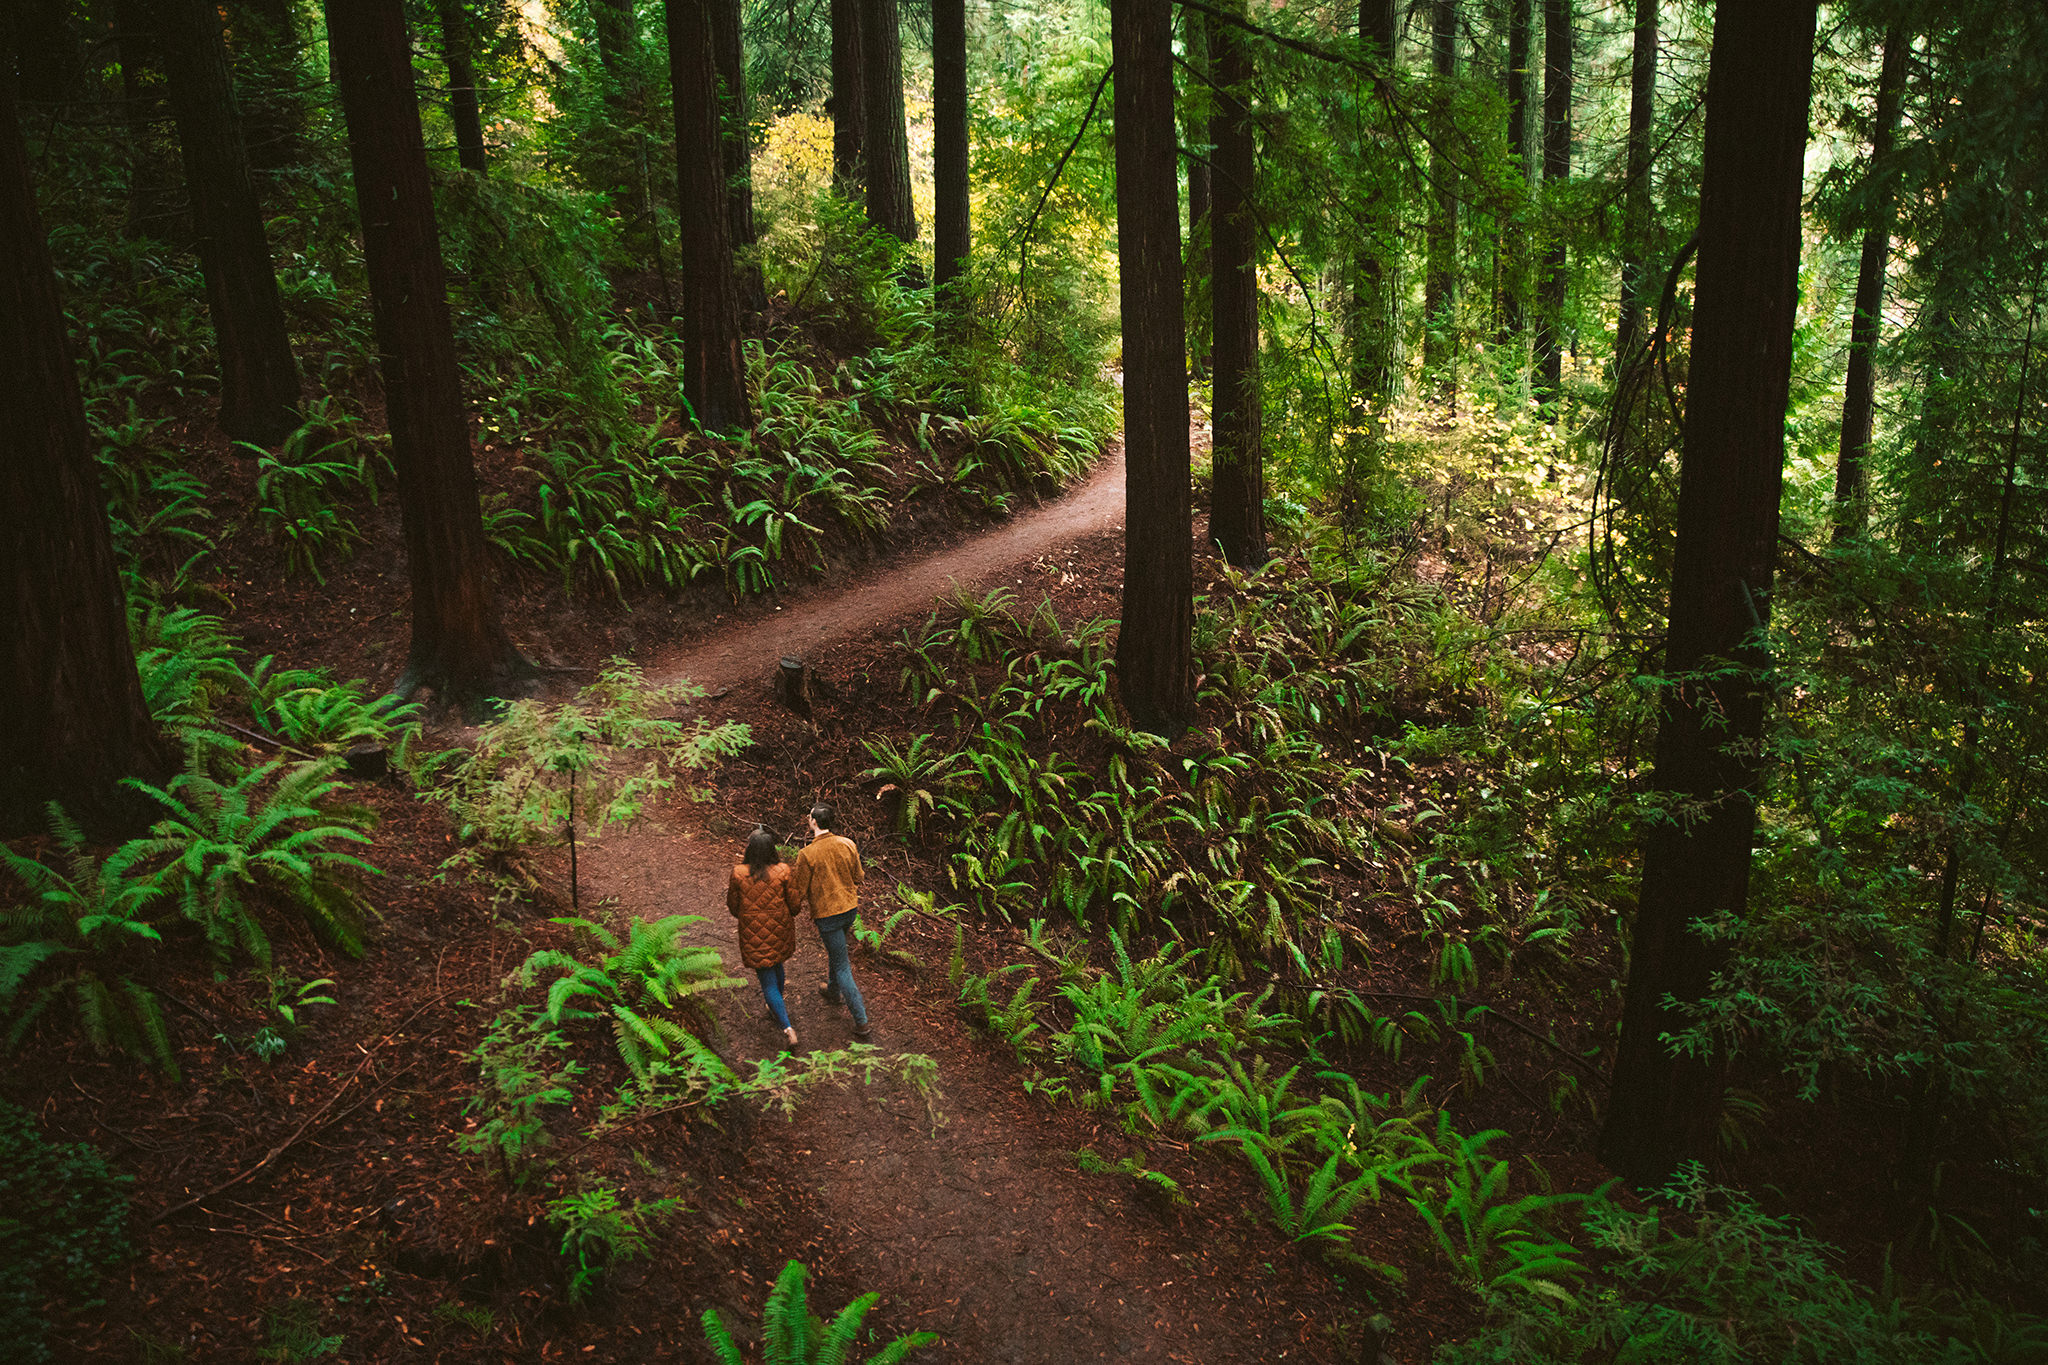 engagement photo at Hoyt Arboretum in the redwood trees